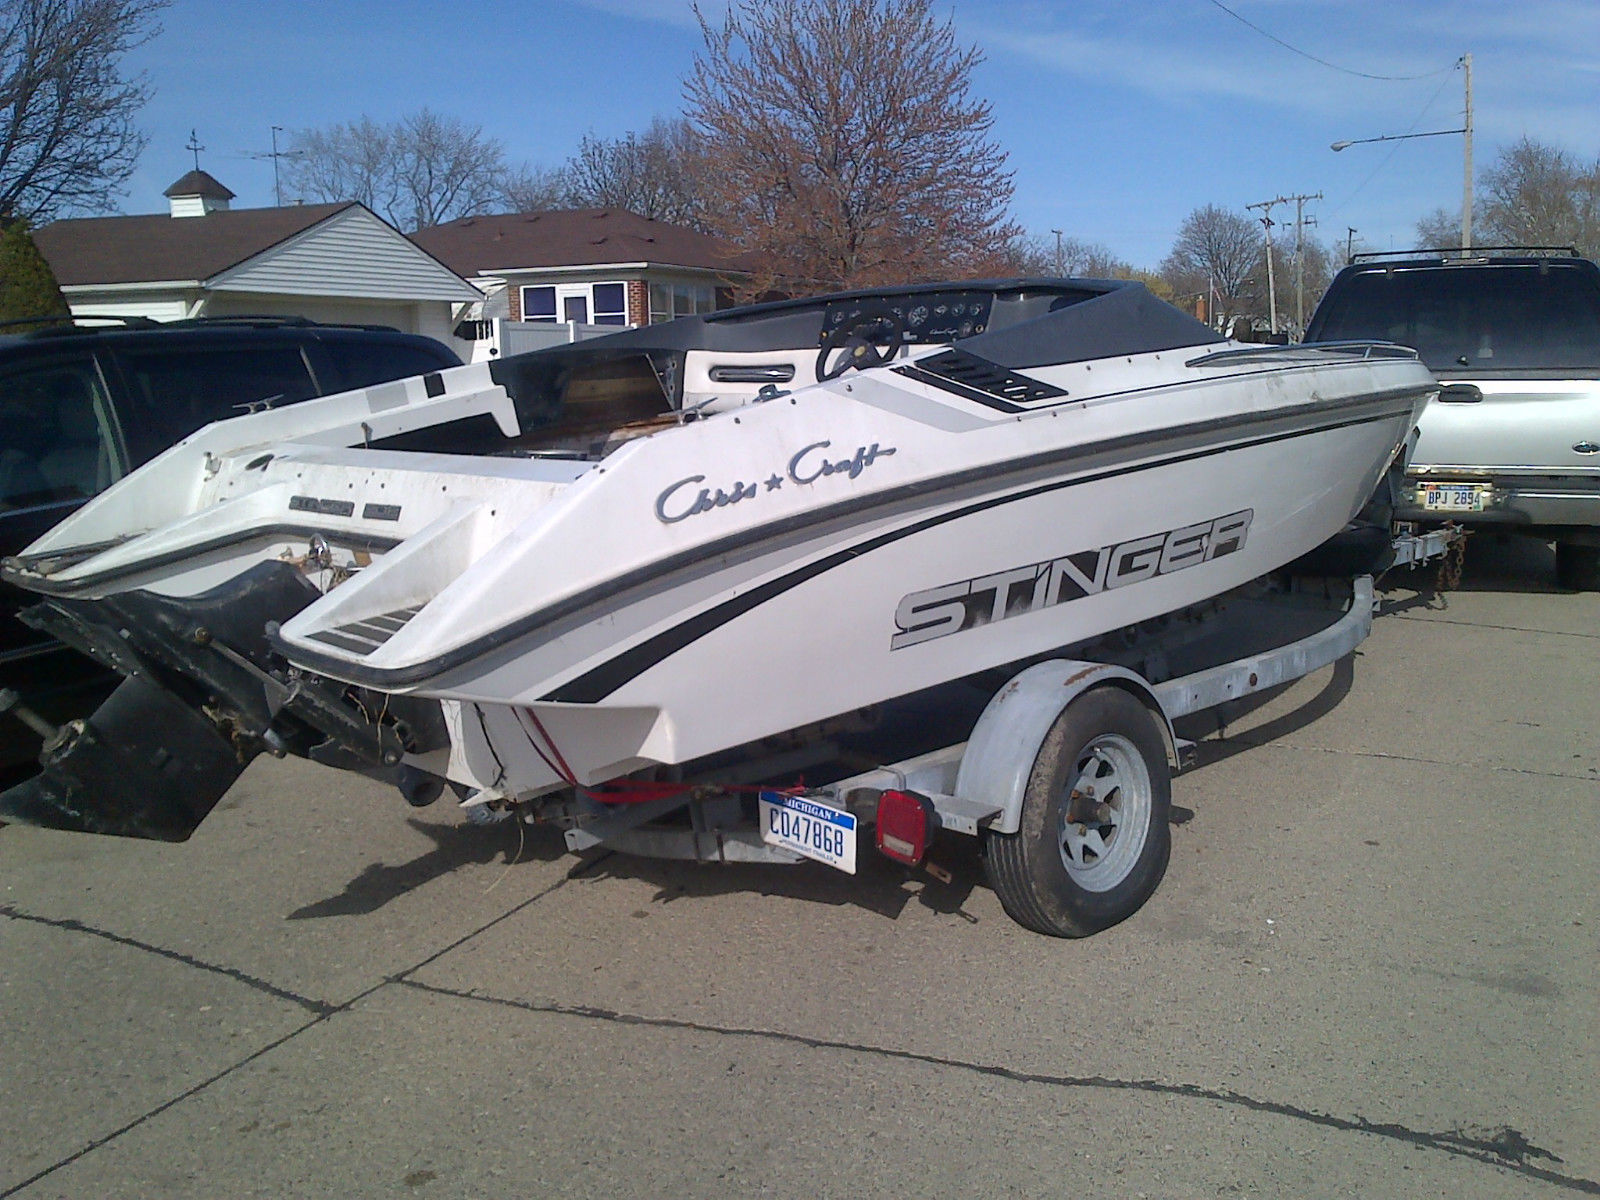 Chris Craft Stinger 1987 for sale for $100 - Boats-from ...